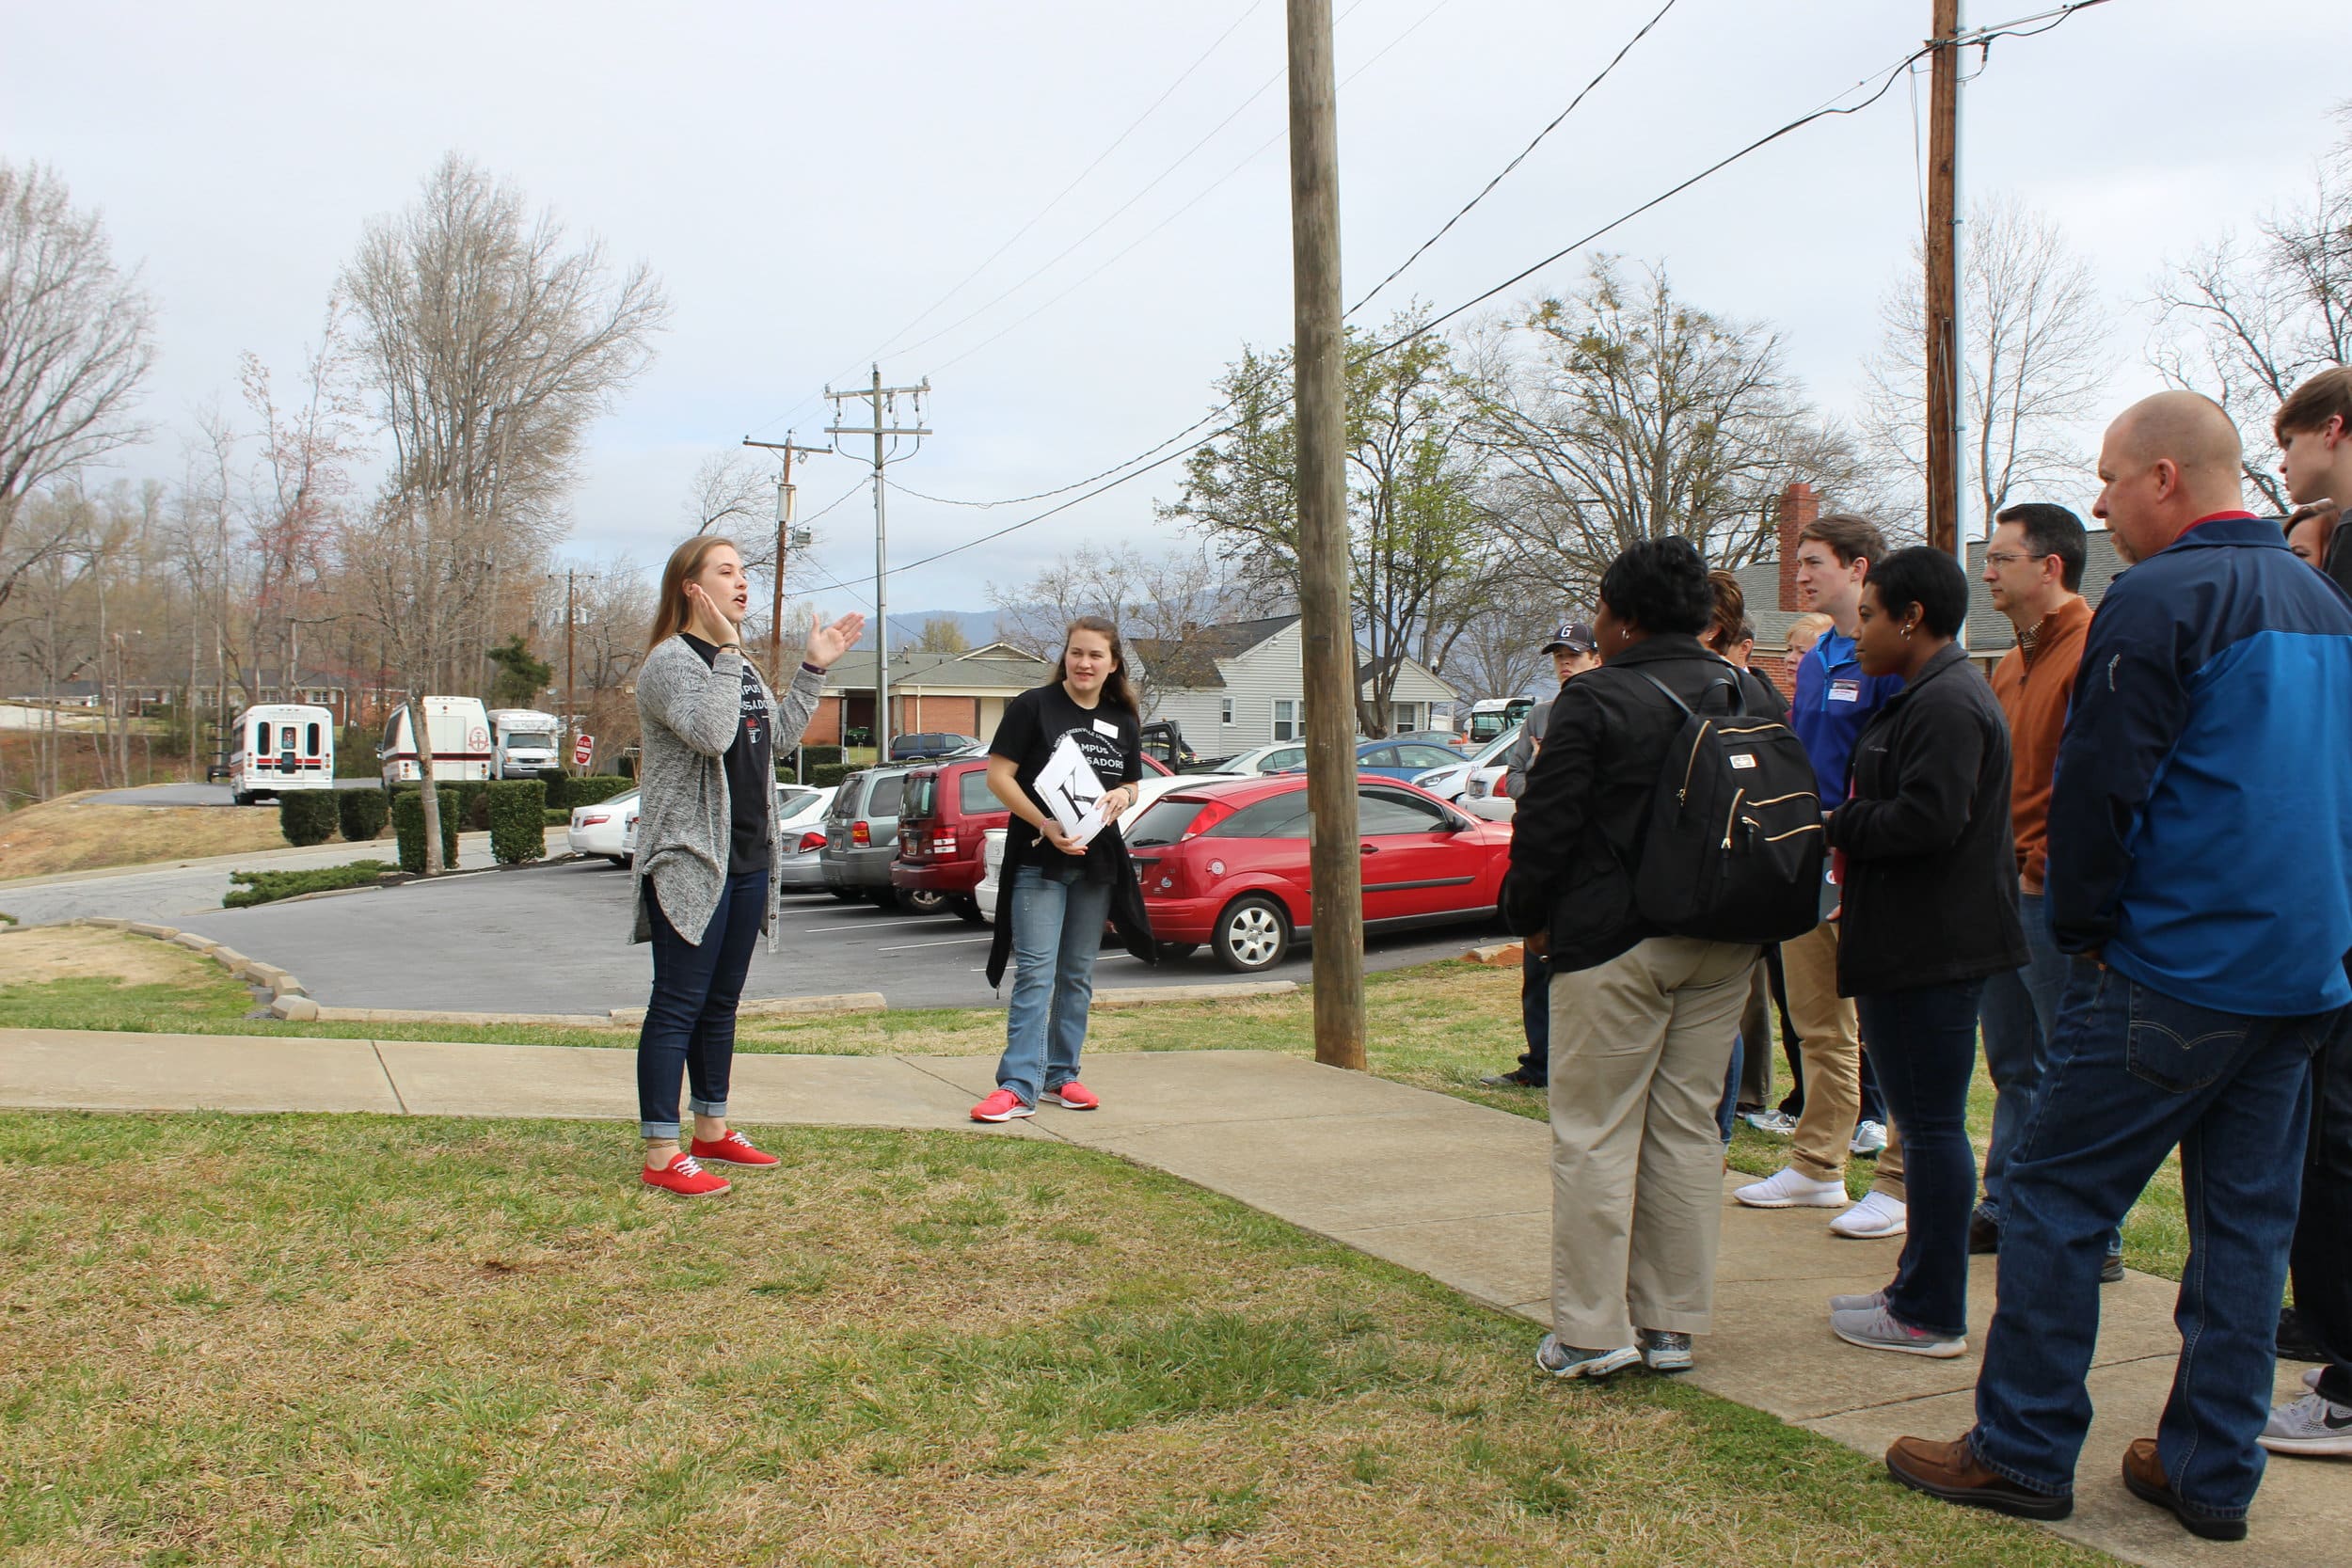 Tours were able to walk through an NGU dorm to see what living on campus is really like.